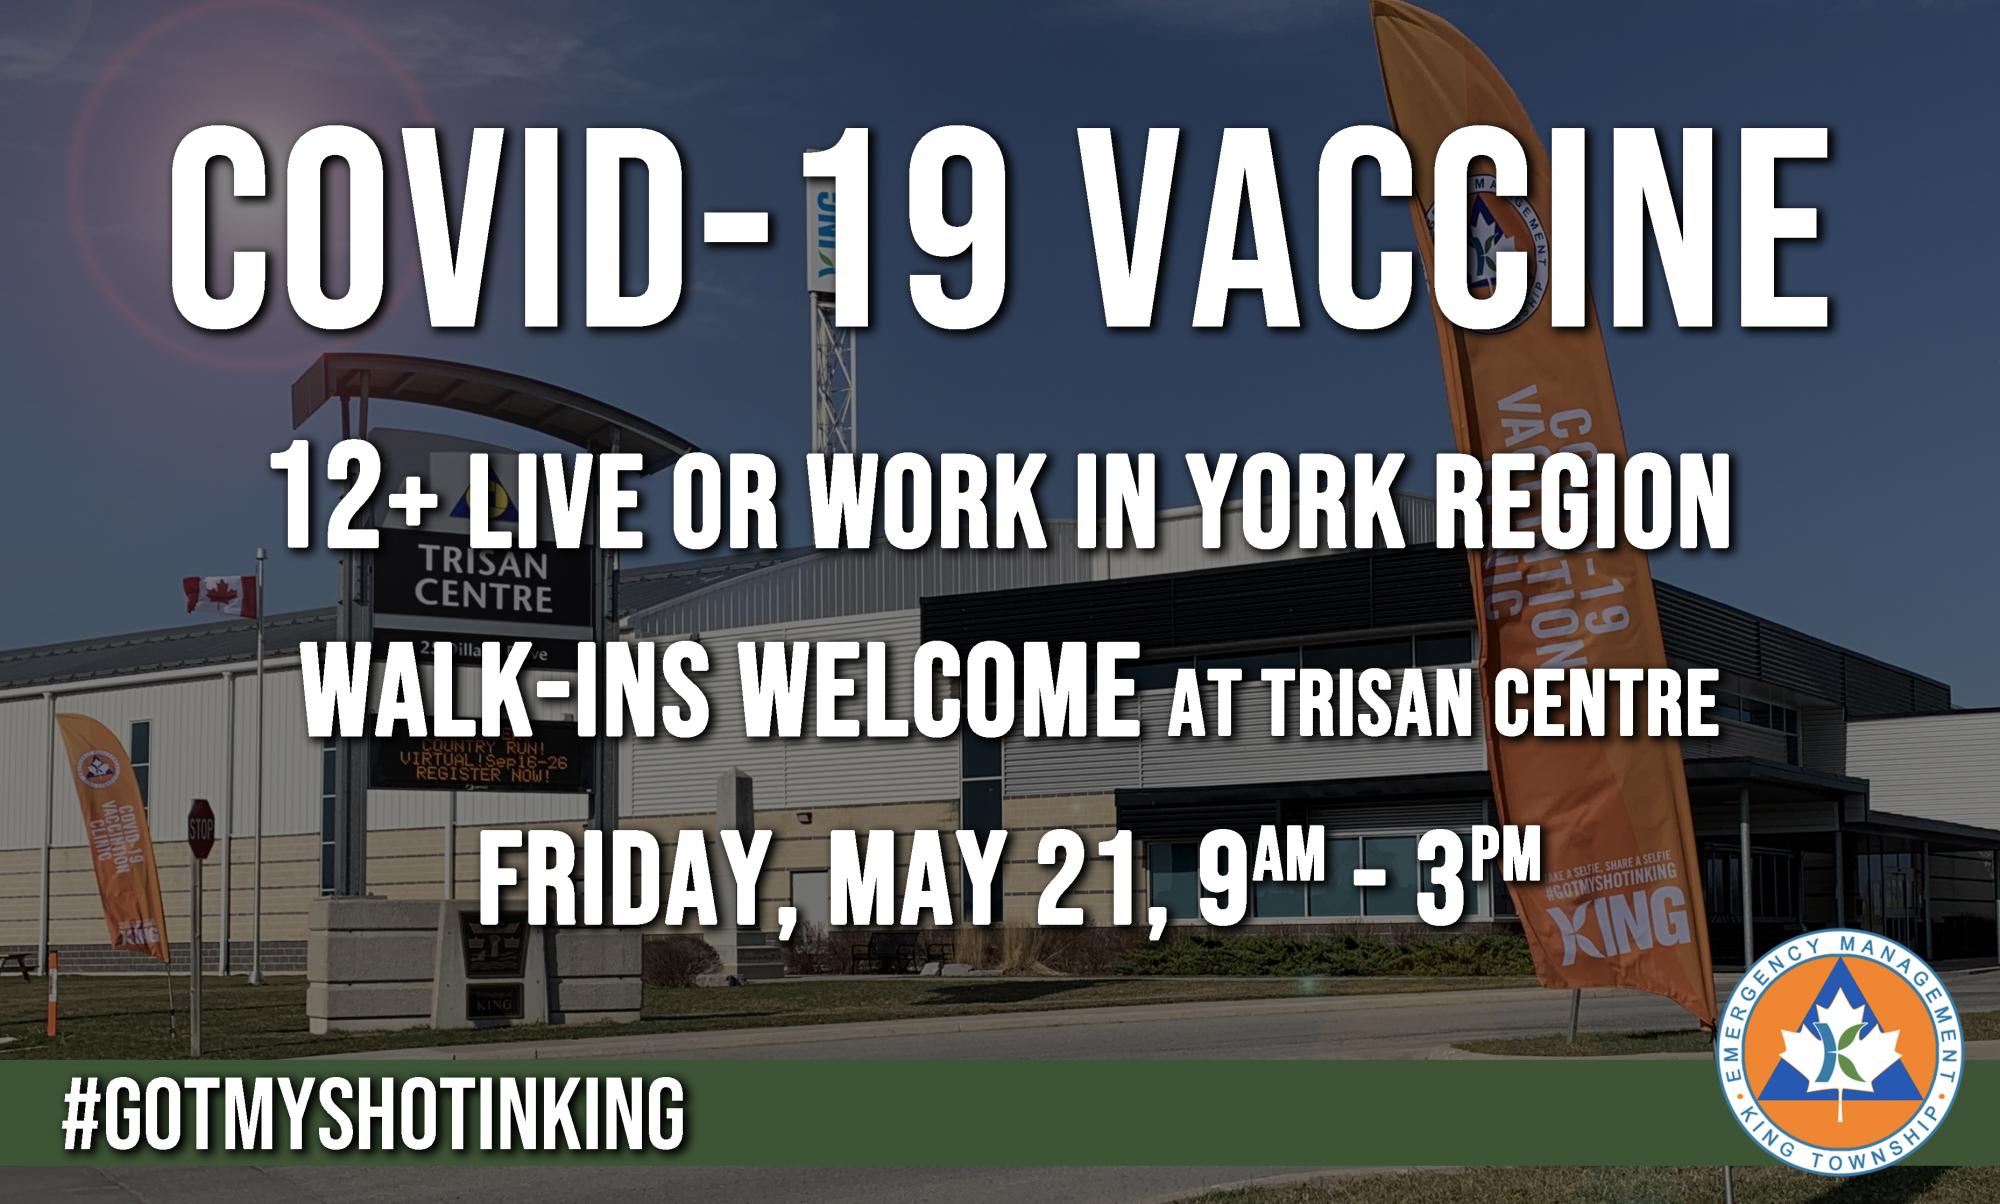 Covid-19 Vaccine Clinic Update for May 21, 2021